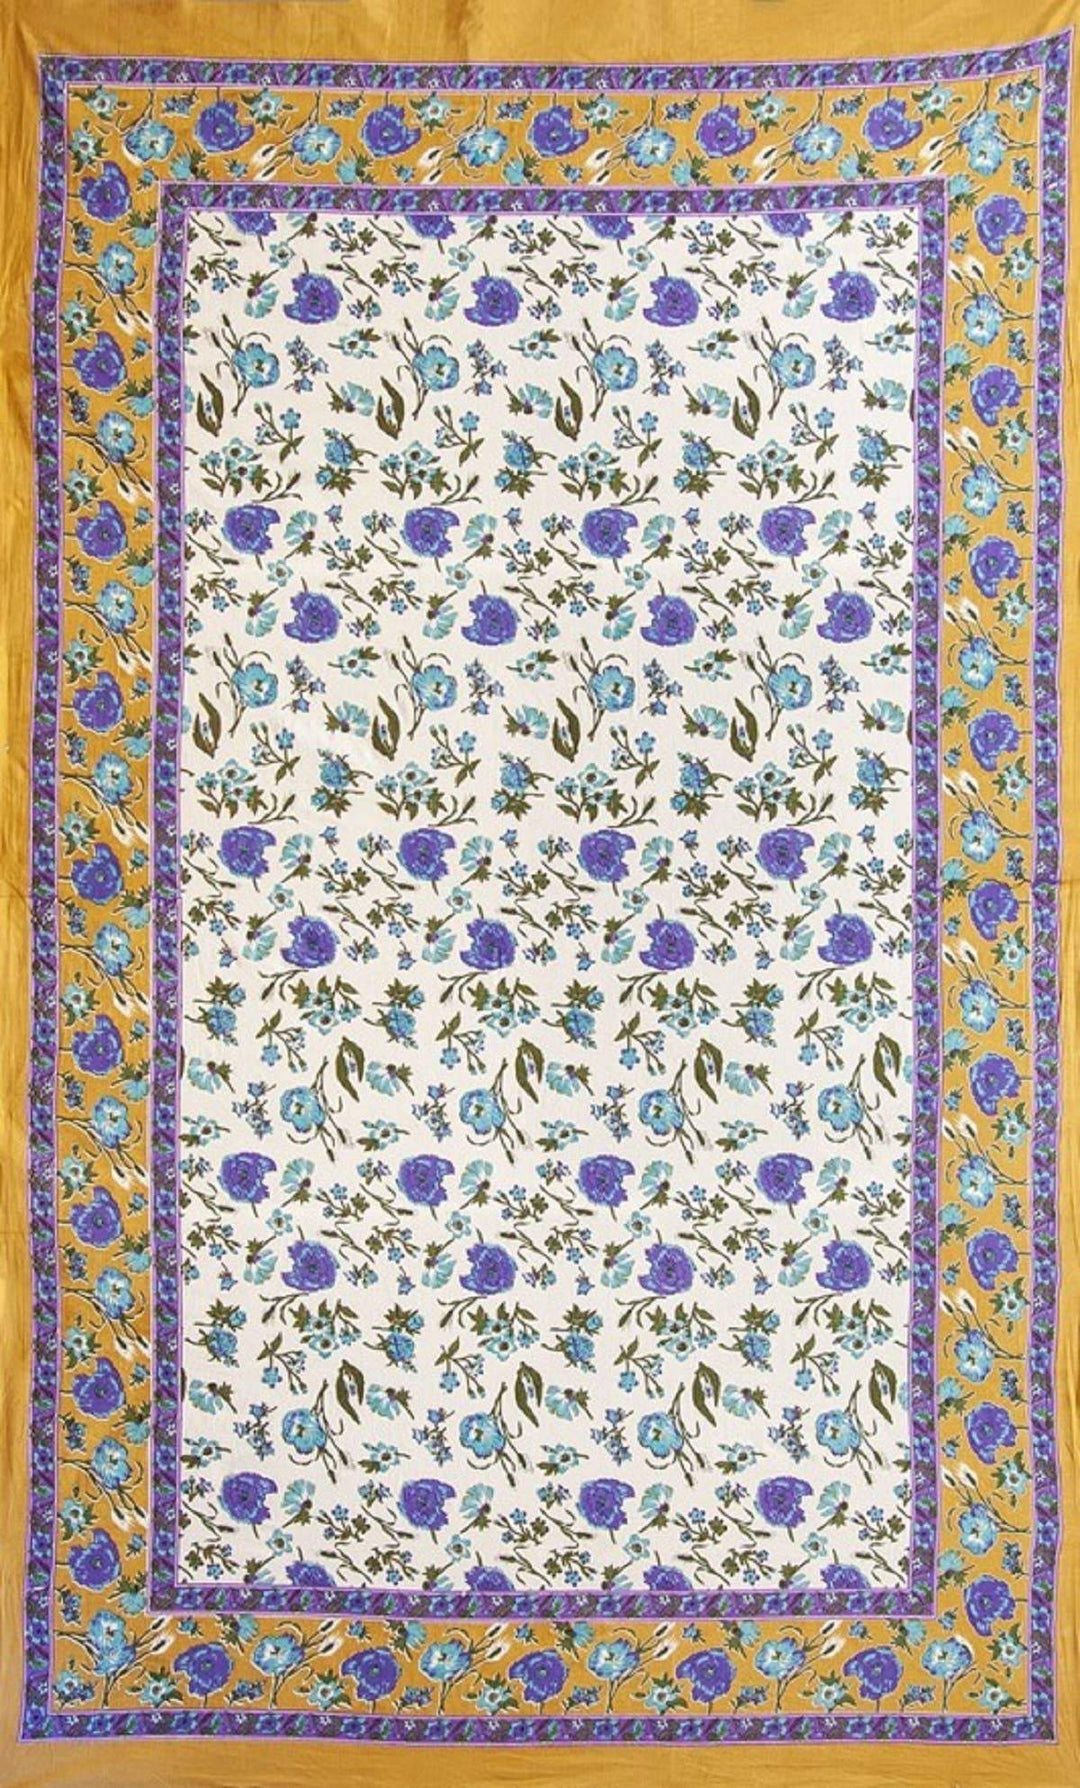 Floral Printed Wall Hanging Picnic Tapestry Beige/Blue